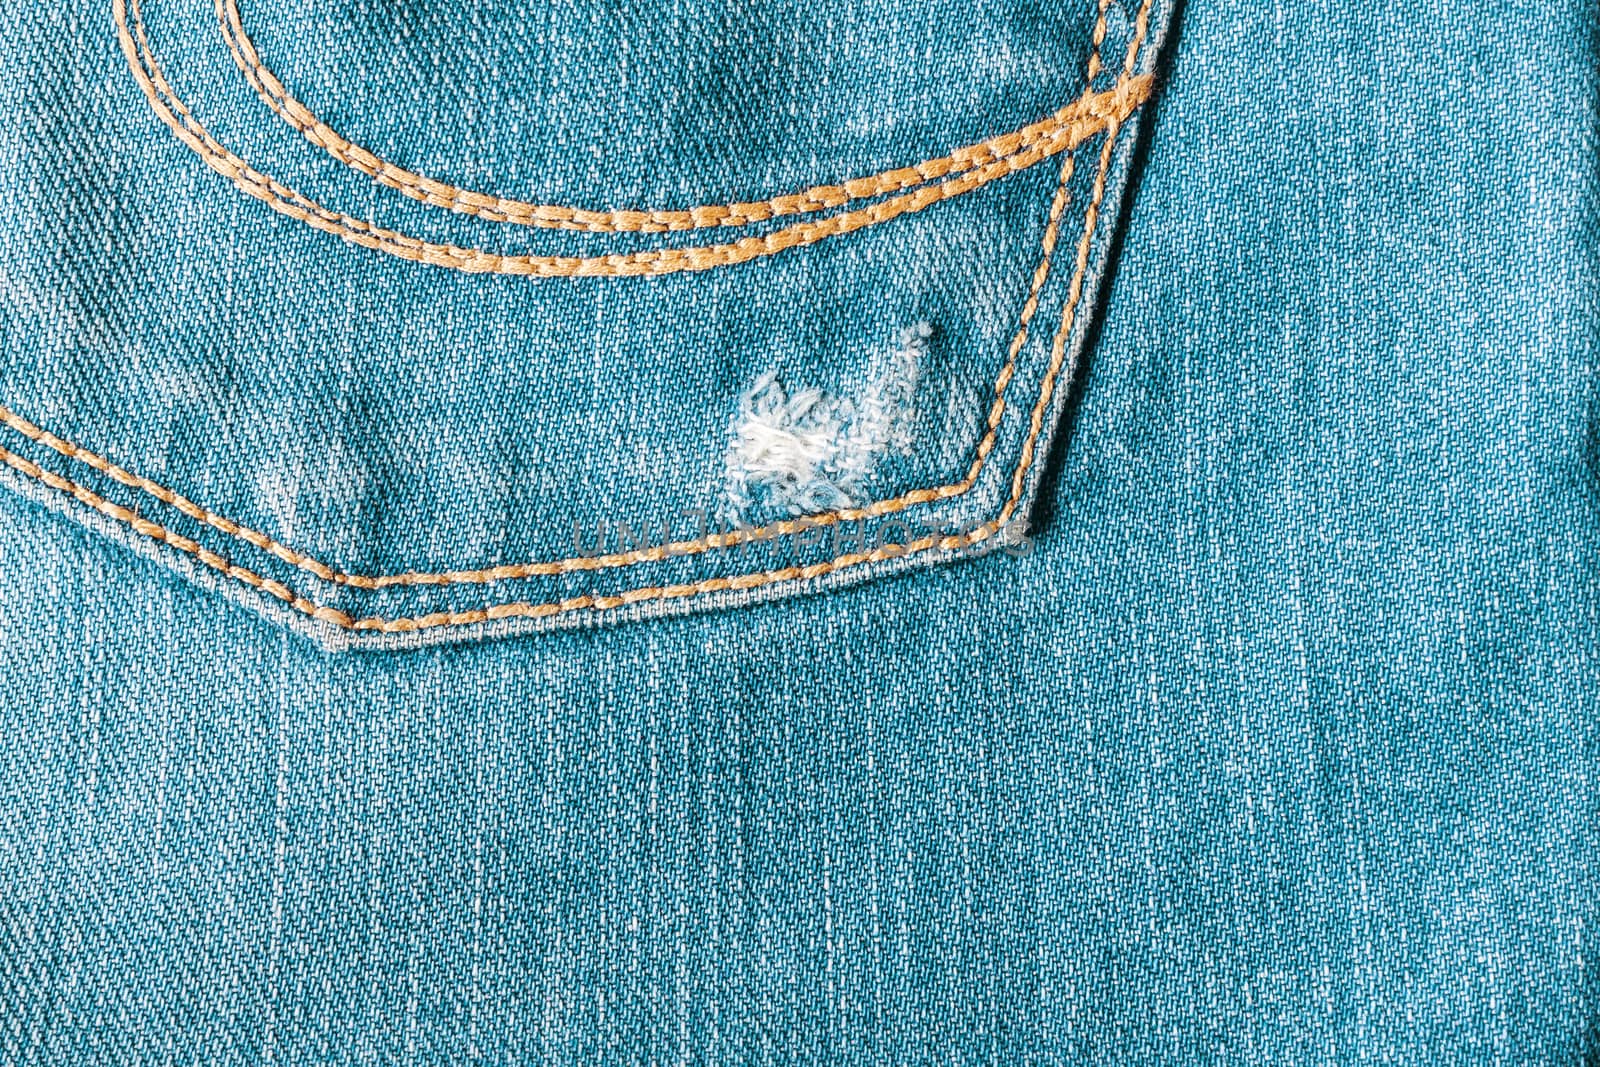 Jeans close-up, old, pocket back, front, crumpled, ragged. by Tanacha